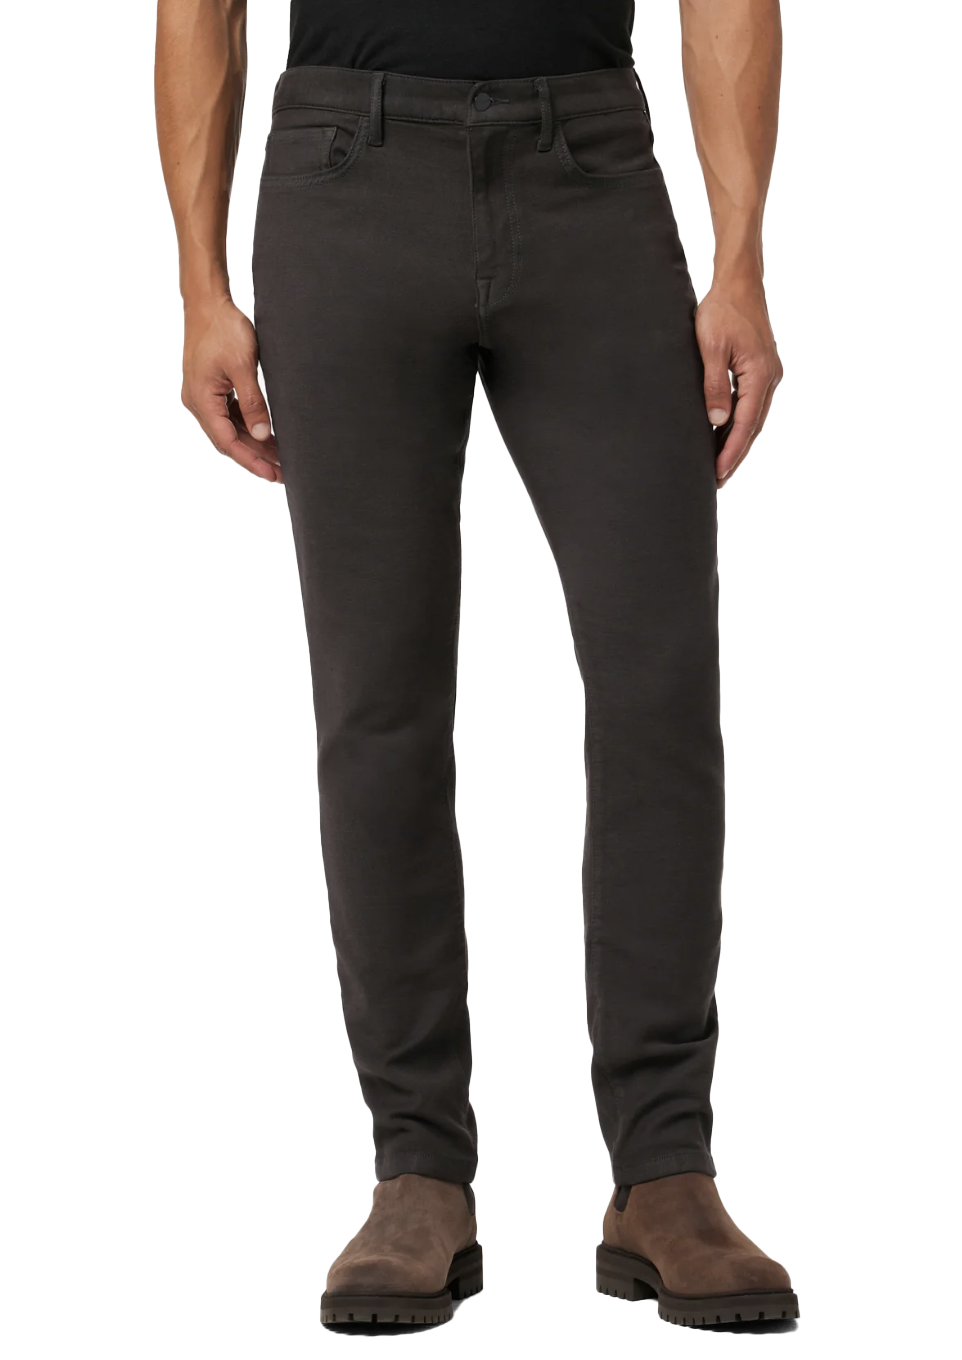 The Airsoft Asher Pant